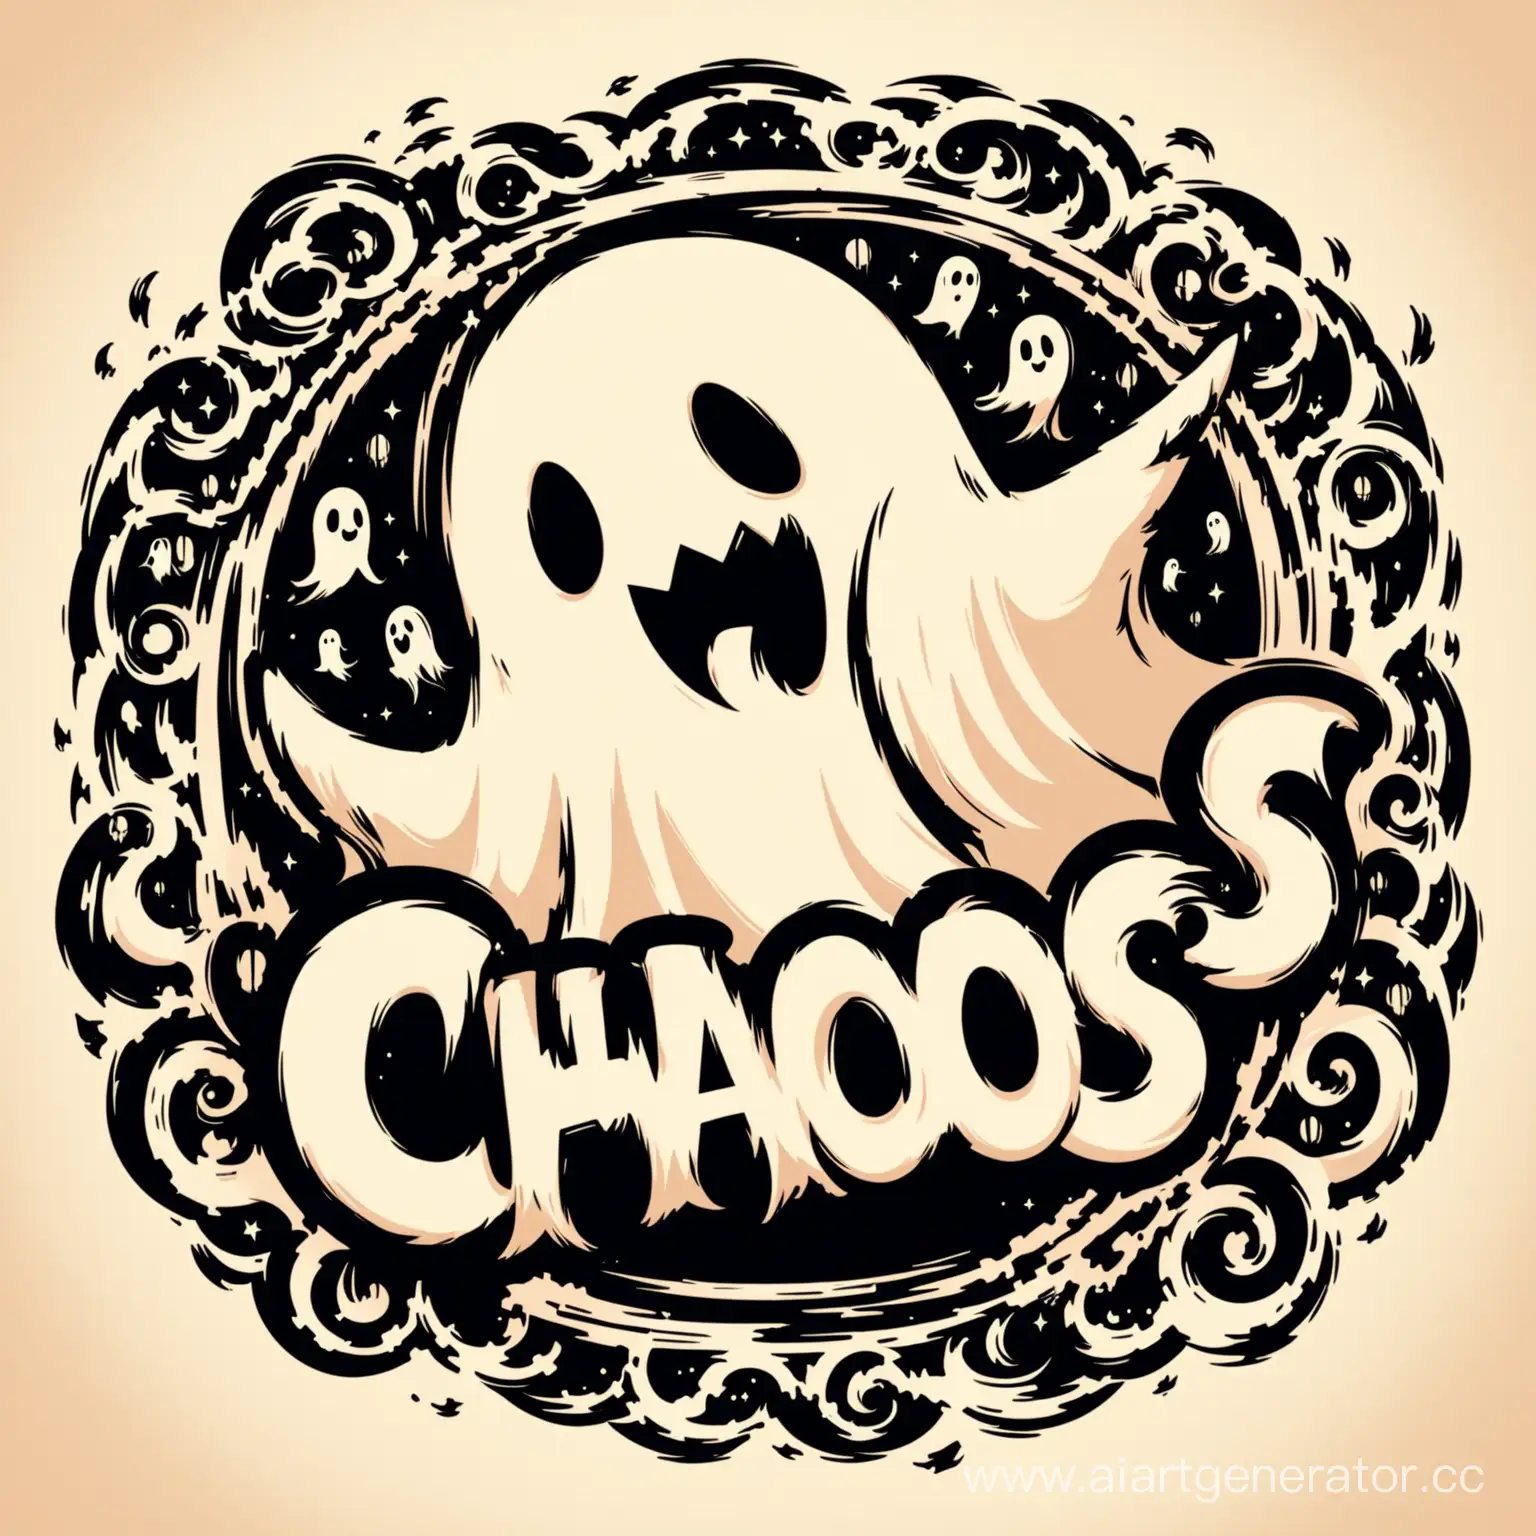 Spectral-Mascot-Engraving-CHAOS-Lettering